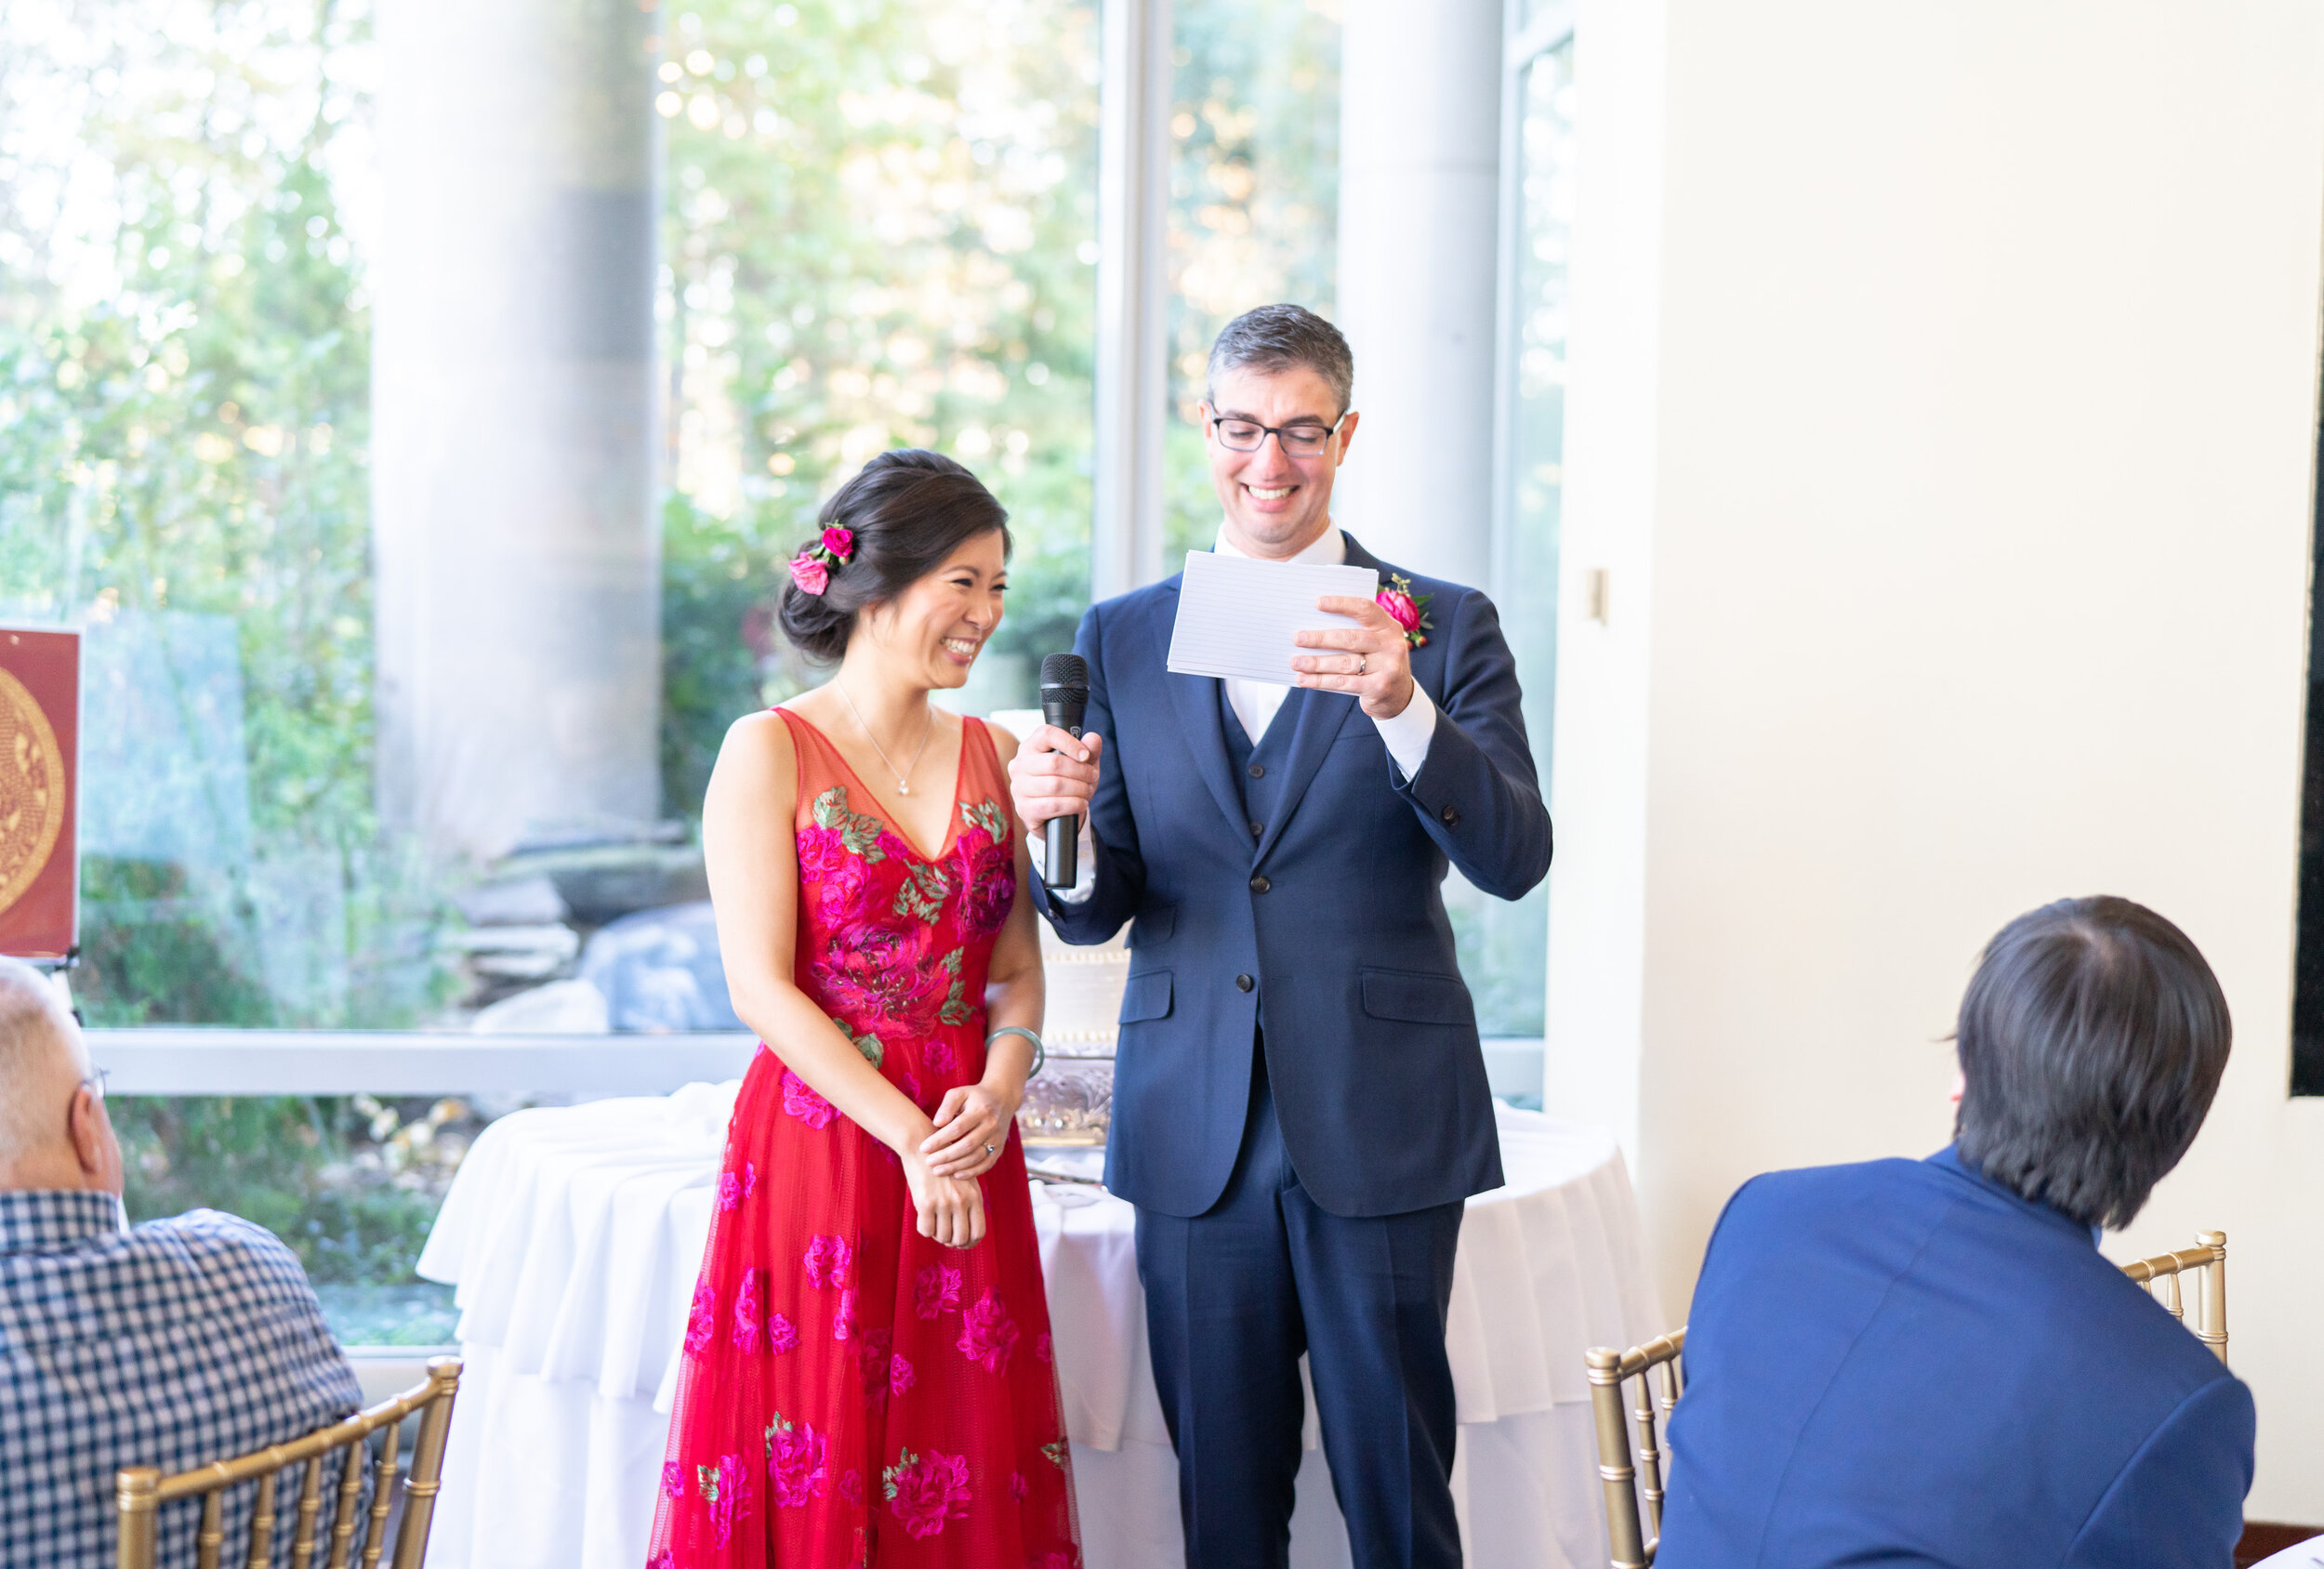 Groom giving toasts in wedding reception in 2941 dining room 